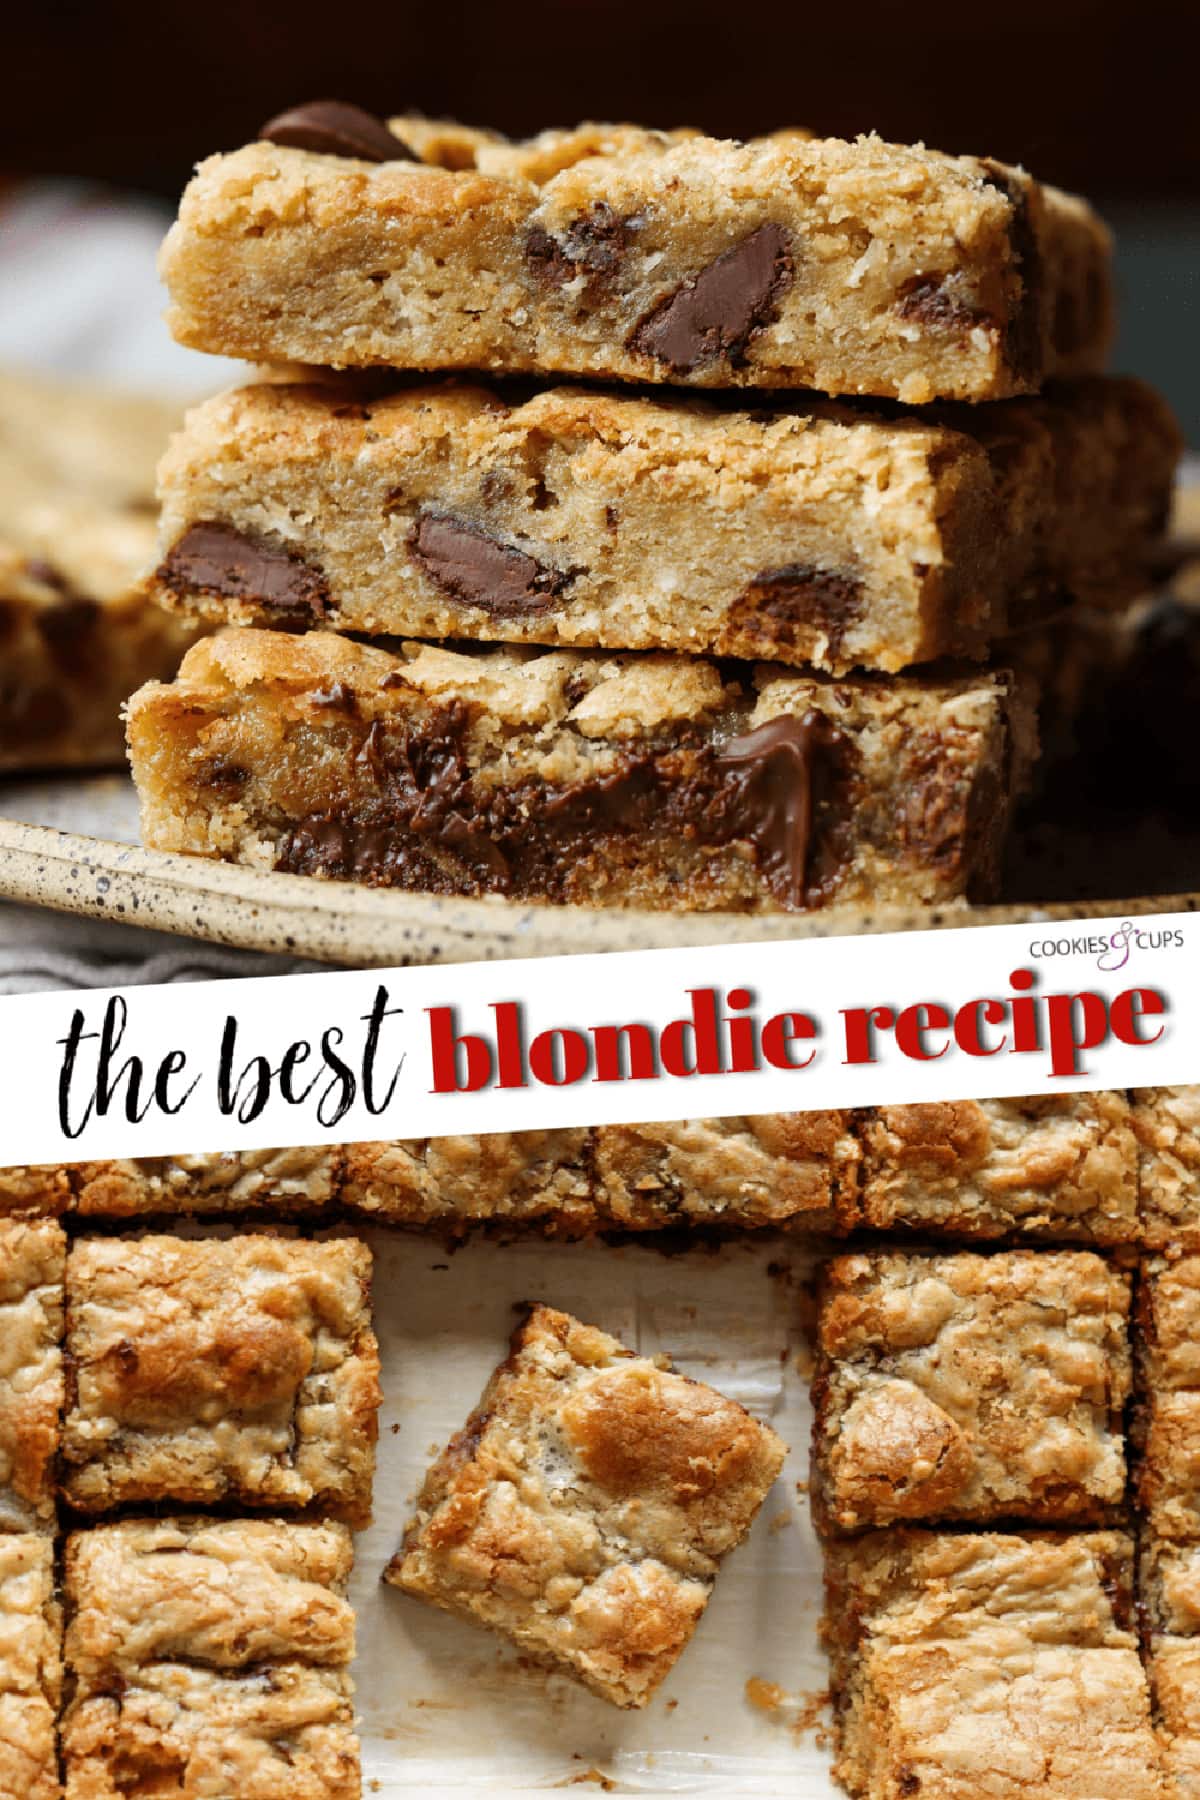 Blondies recipe Pinterest image collage with text